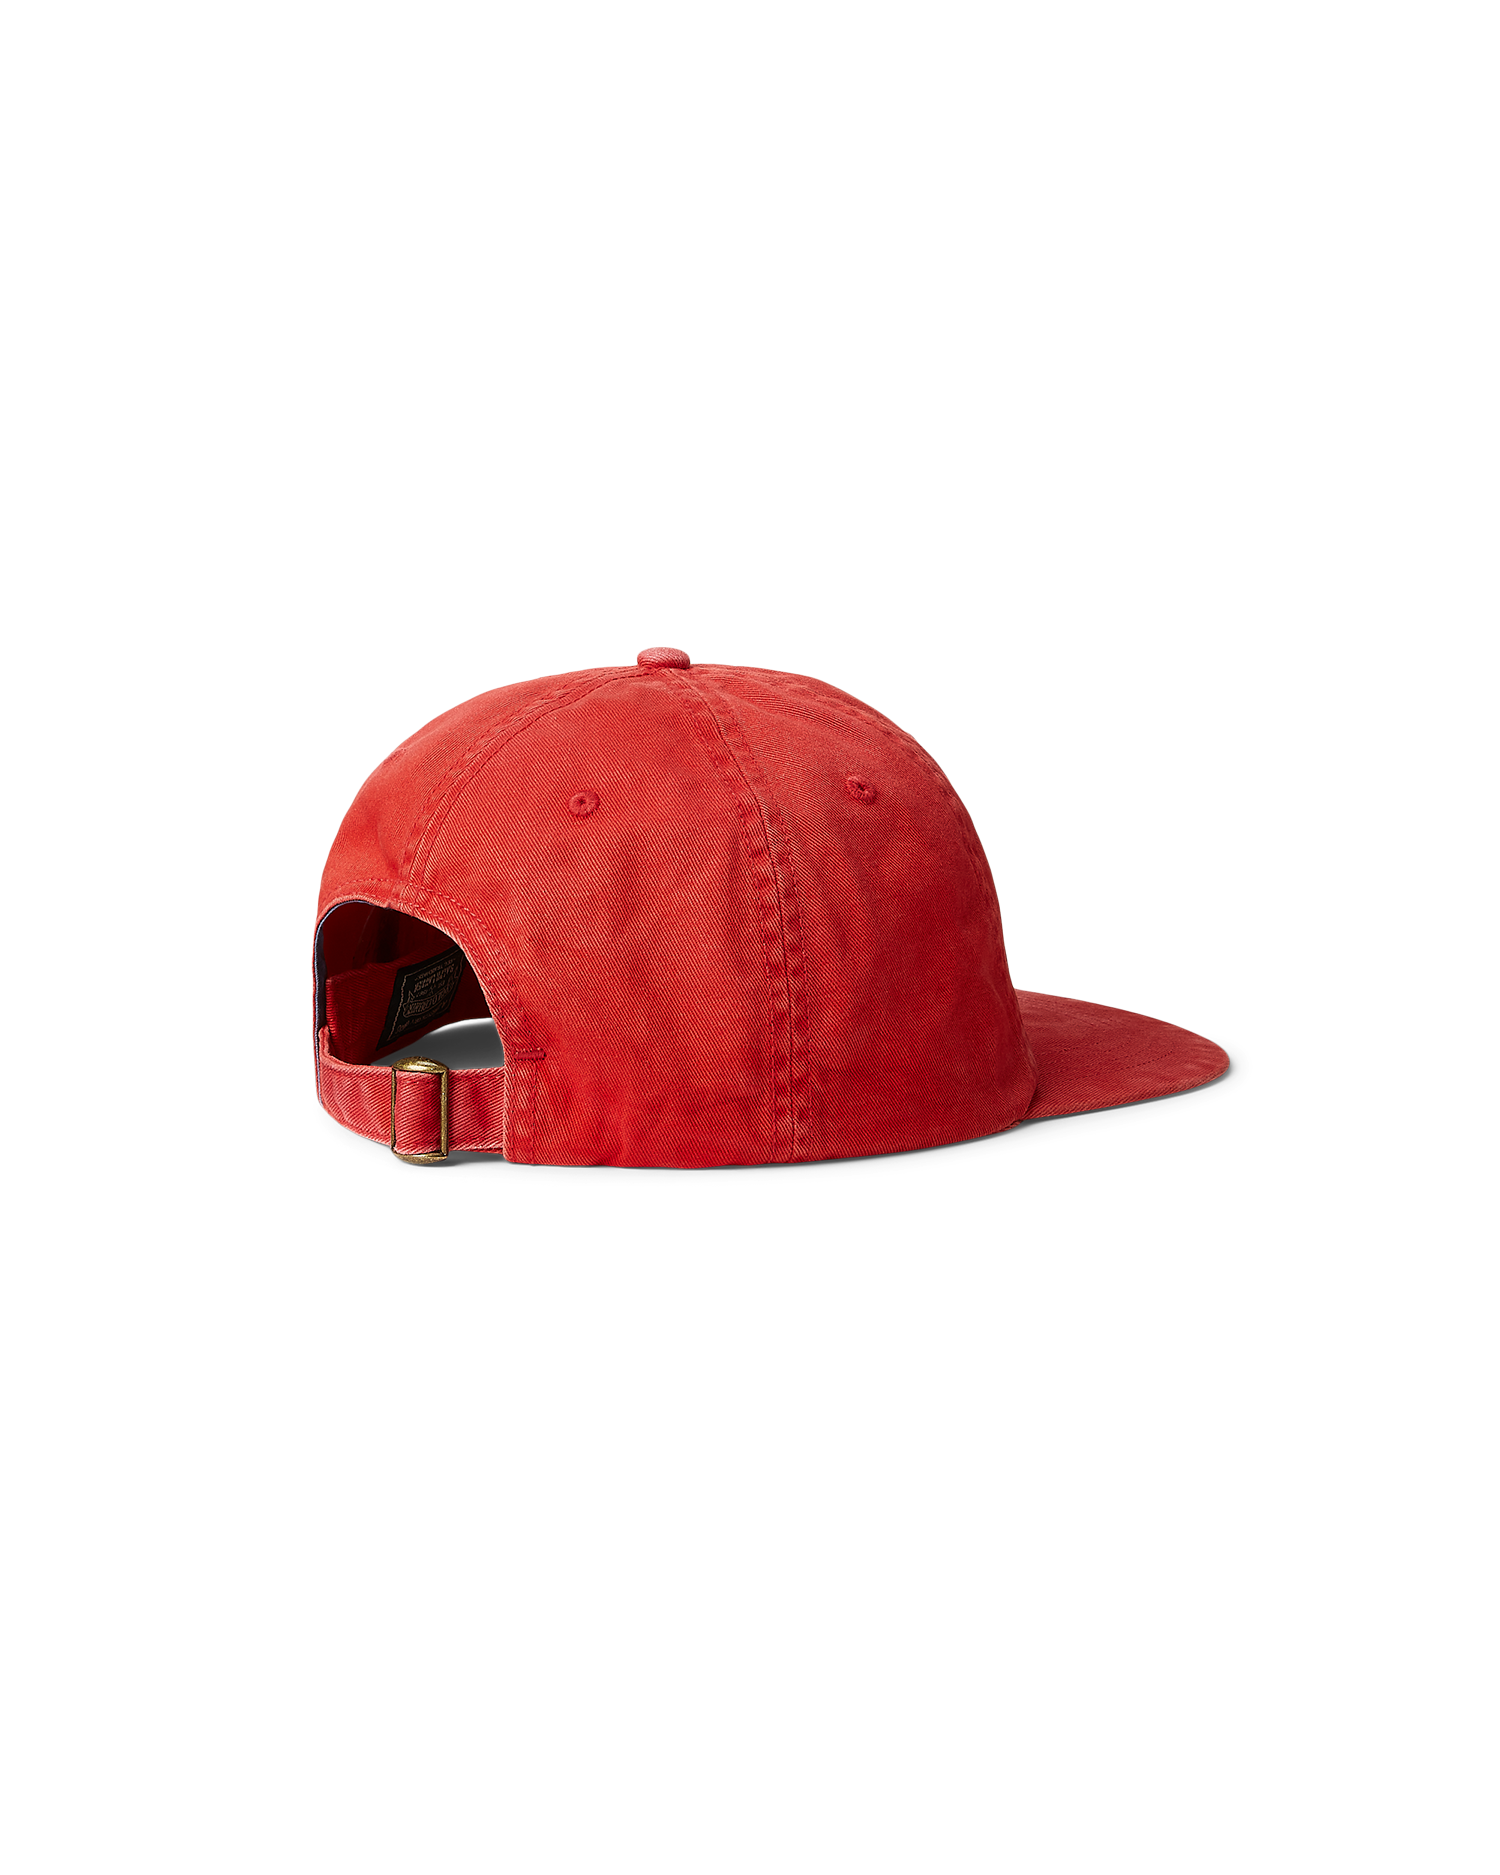 Polo Sportsman Twill Ball Cap - Red